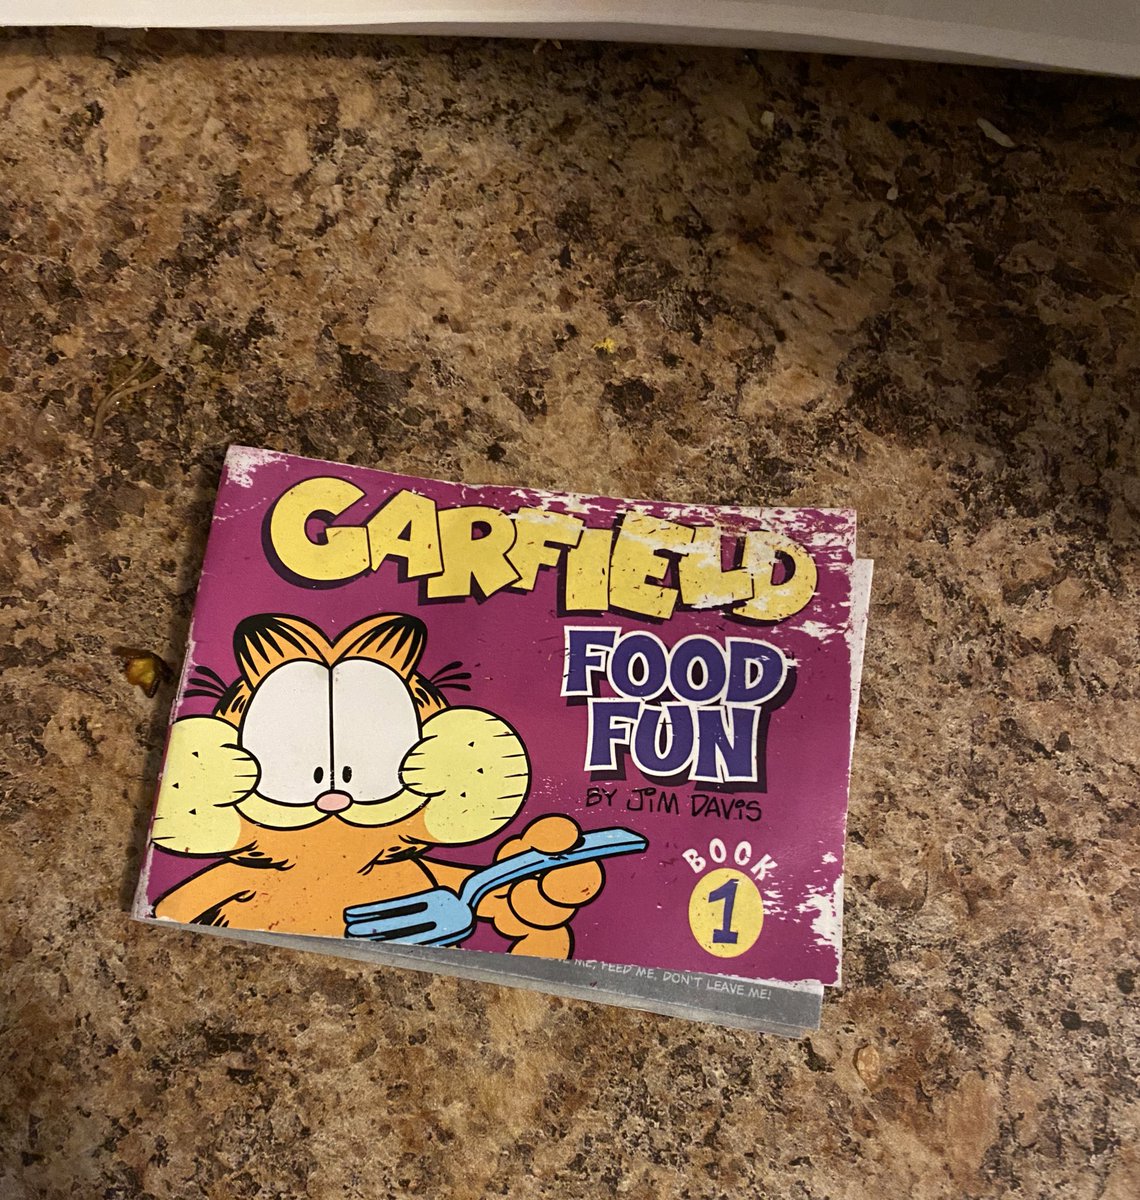 Nathen Mazri was very thoughtful though. He packed a collectible Garfield mini comic book at the very bottom of the bag for me.Owning a piece of Garfield paraphernalia that’s waterlogged and smells awful feels great. Should I laminate this!?/3